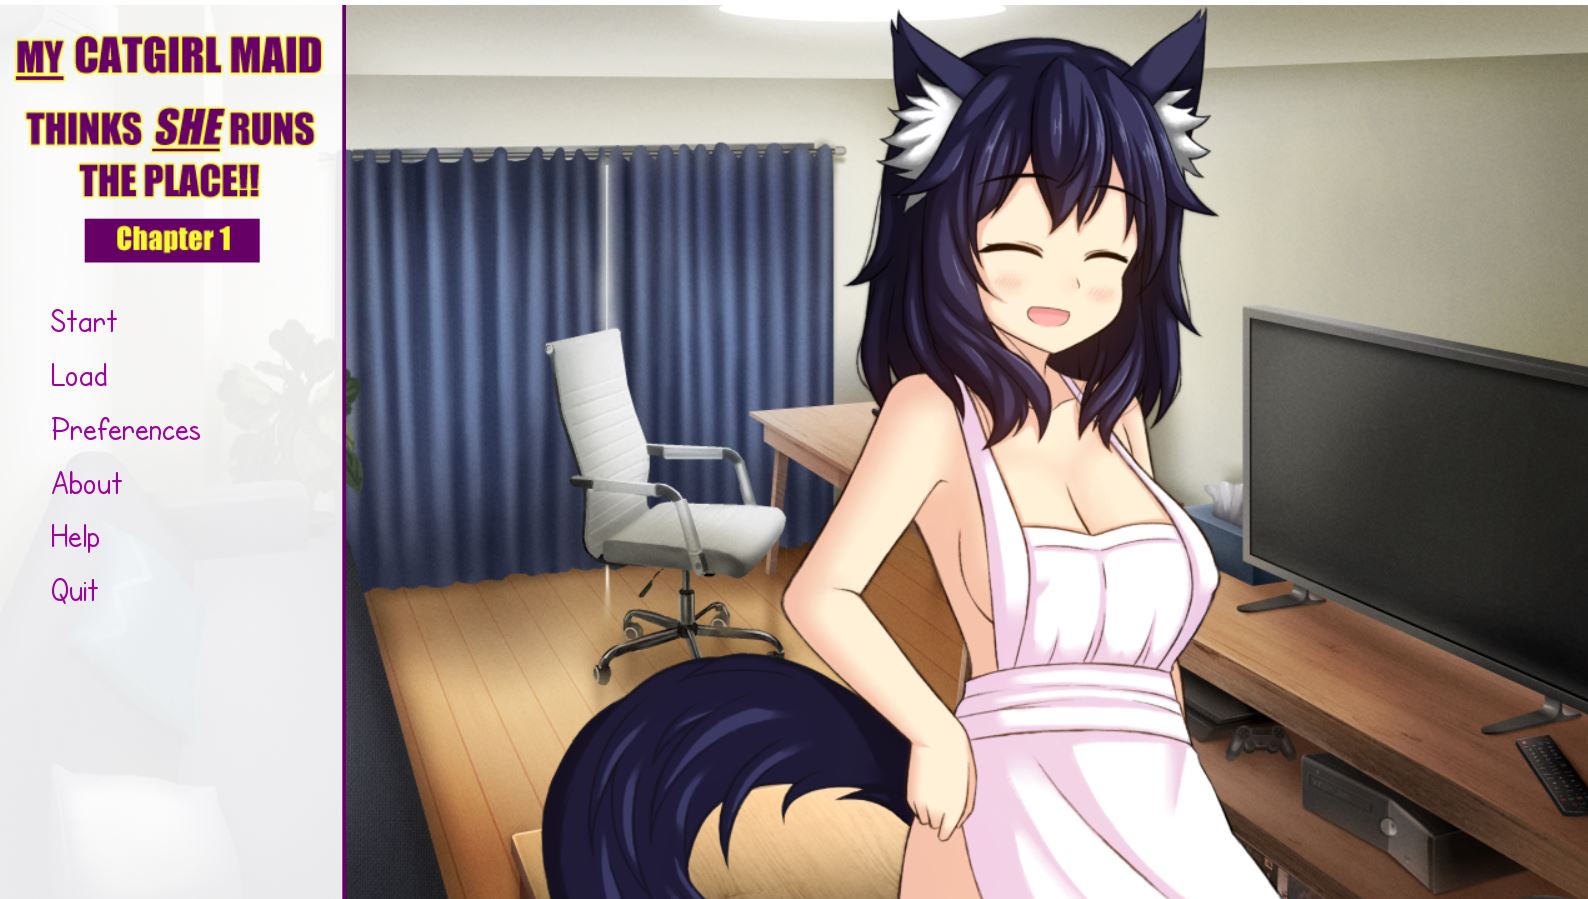 Anime Cat Girl Porn Games - My Catgirl Maid Thinks She Runs the Place - free game download, reviews,  mega - xGames